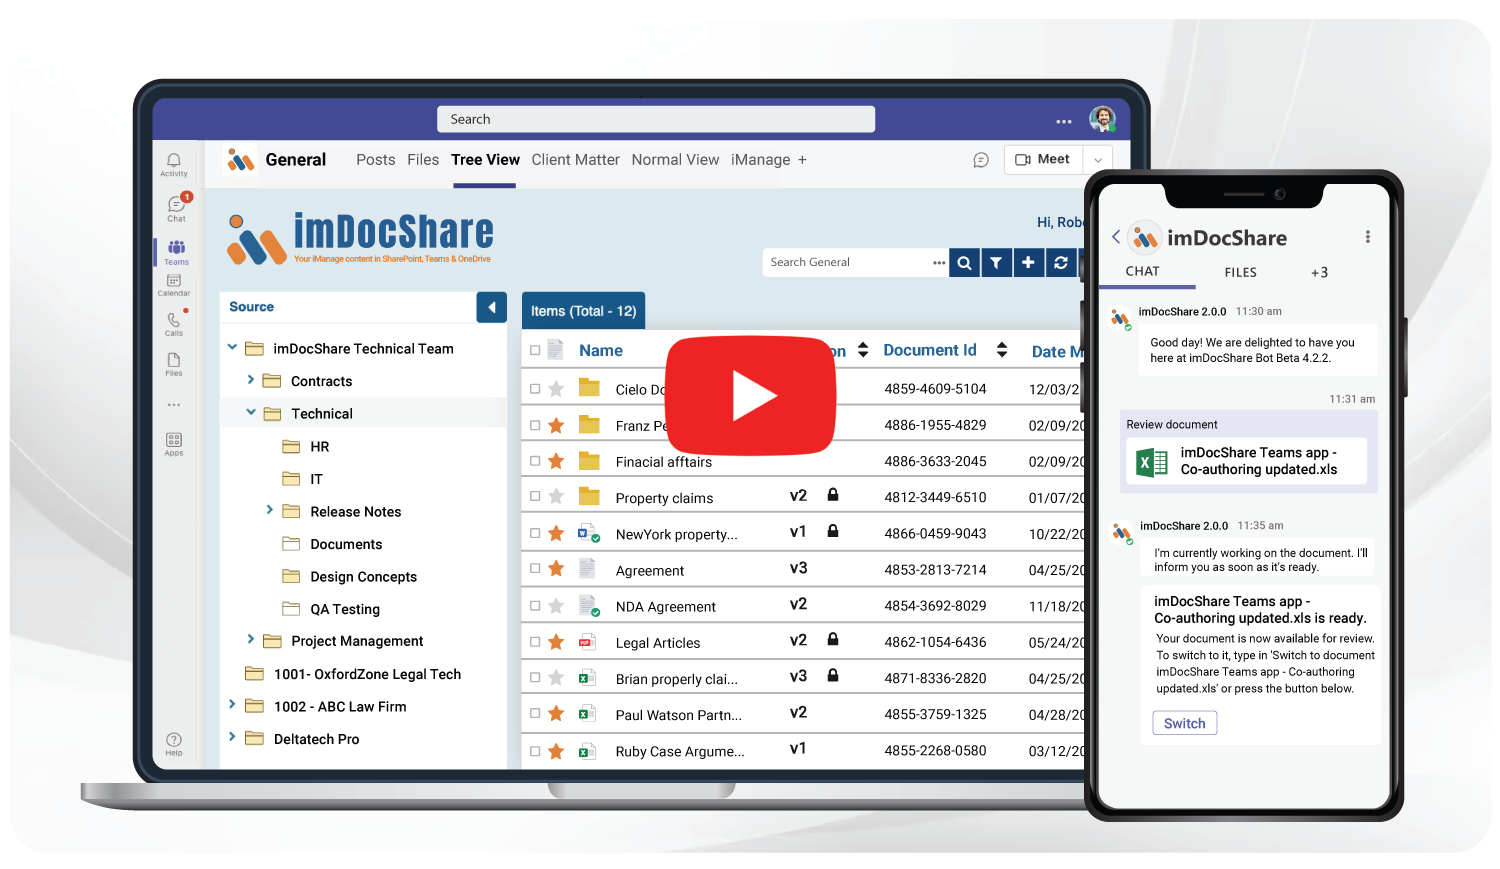 Learn more about imDocShare